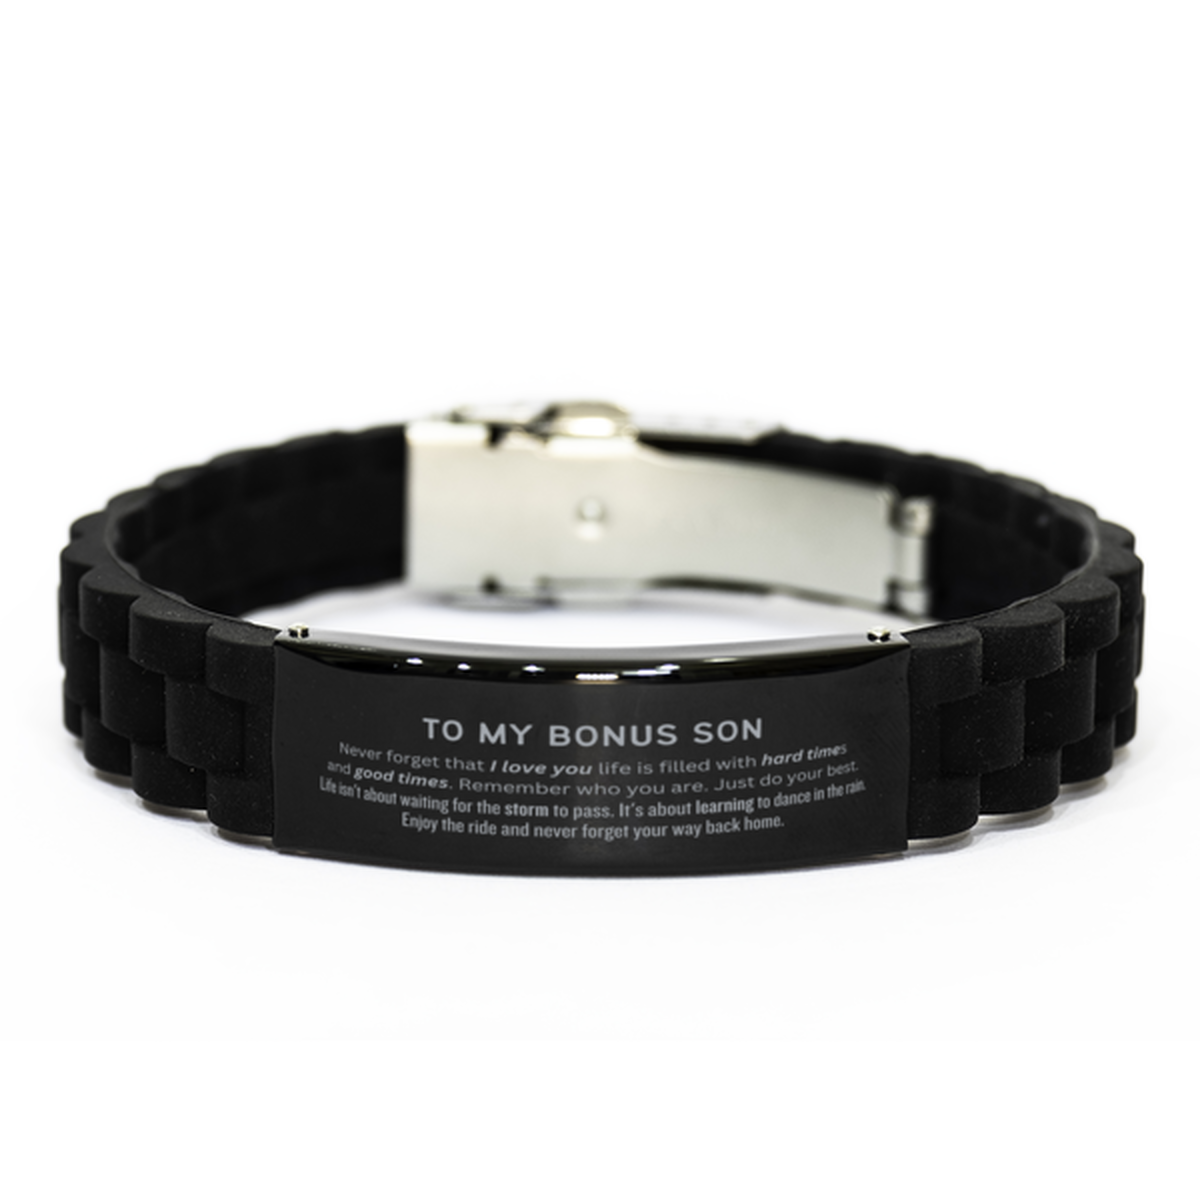 Christmas Bonus Son Black Glidelock Clasp Bracelet Gifts, To My Bonus Son Birthday Thank You Gifts For Bonus Son, Graduation Unique Gifts For Bonus Son To My Bonus Son Never forget that I love you life is filled with hard times and good times. Remember wh